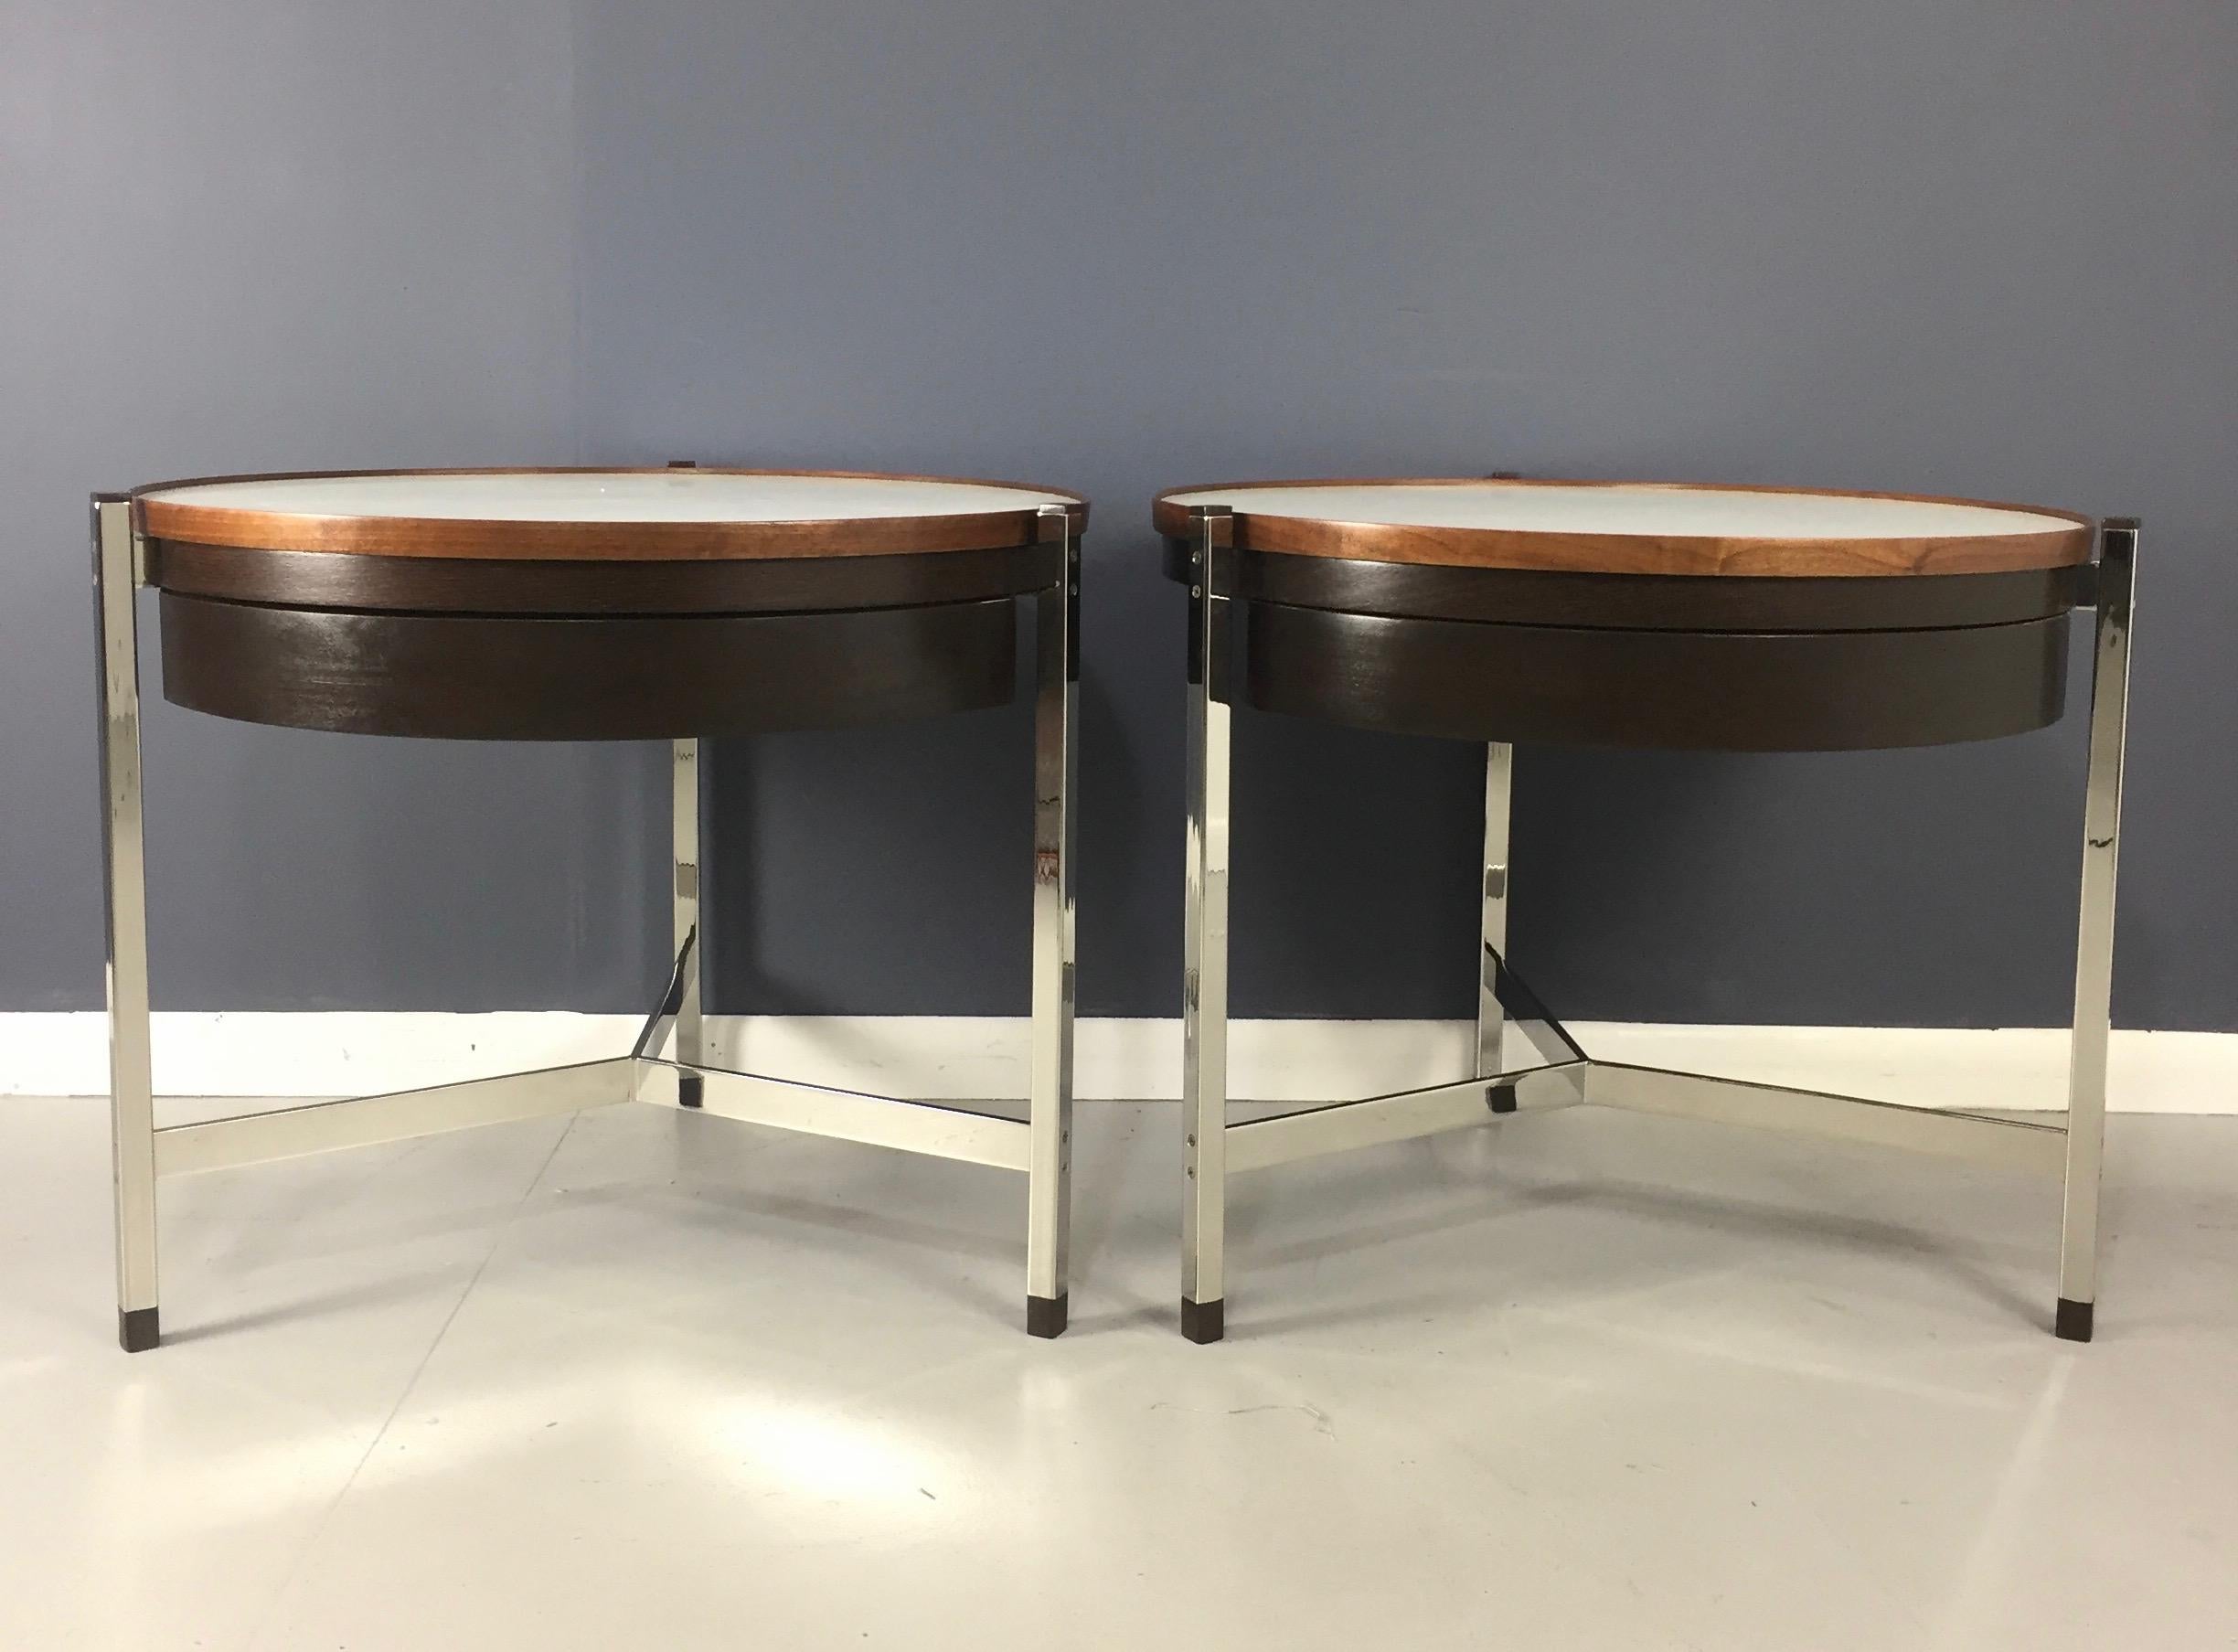 A pair of exceptionally rare and unusual round occasional tables in walnut and rosewood with Micarta tops and stainless steel structure. Tables with a single drawer and rosewood feet and caps.

These tables have gone through an extensive